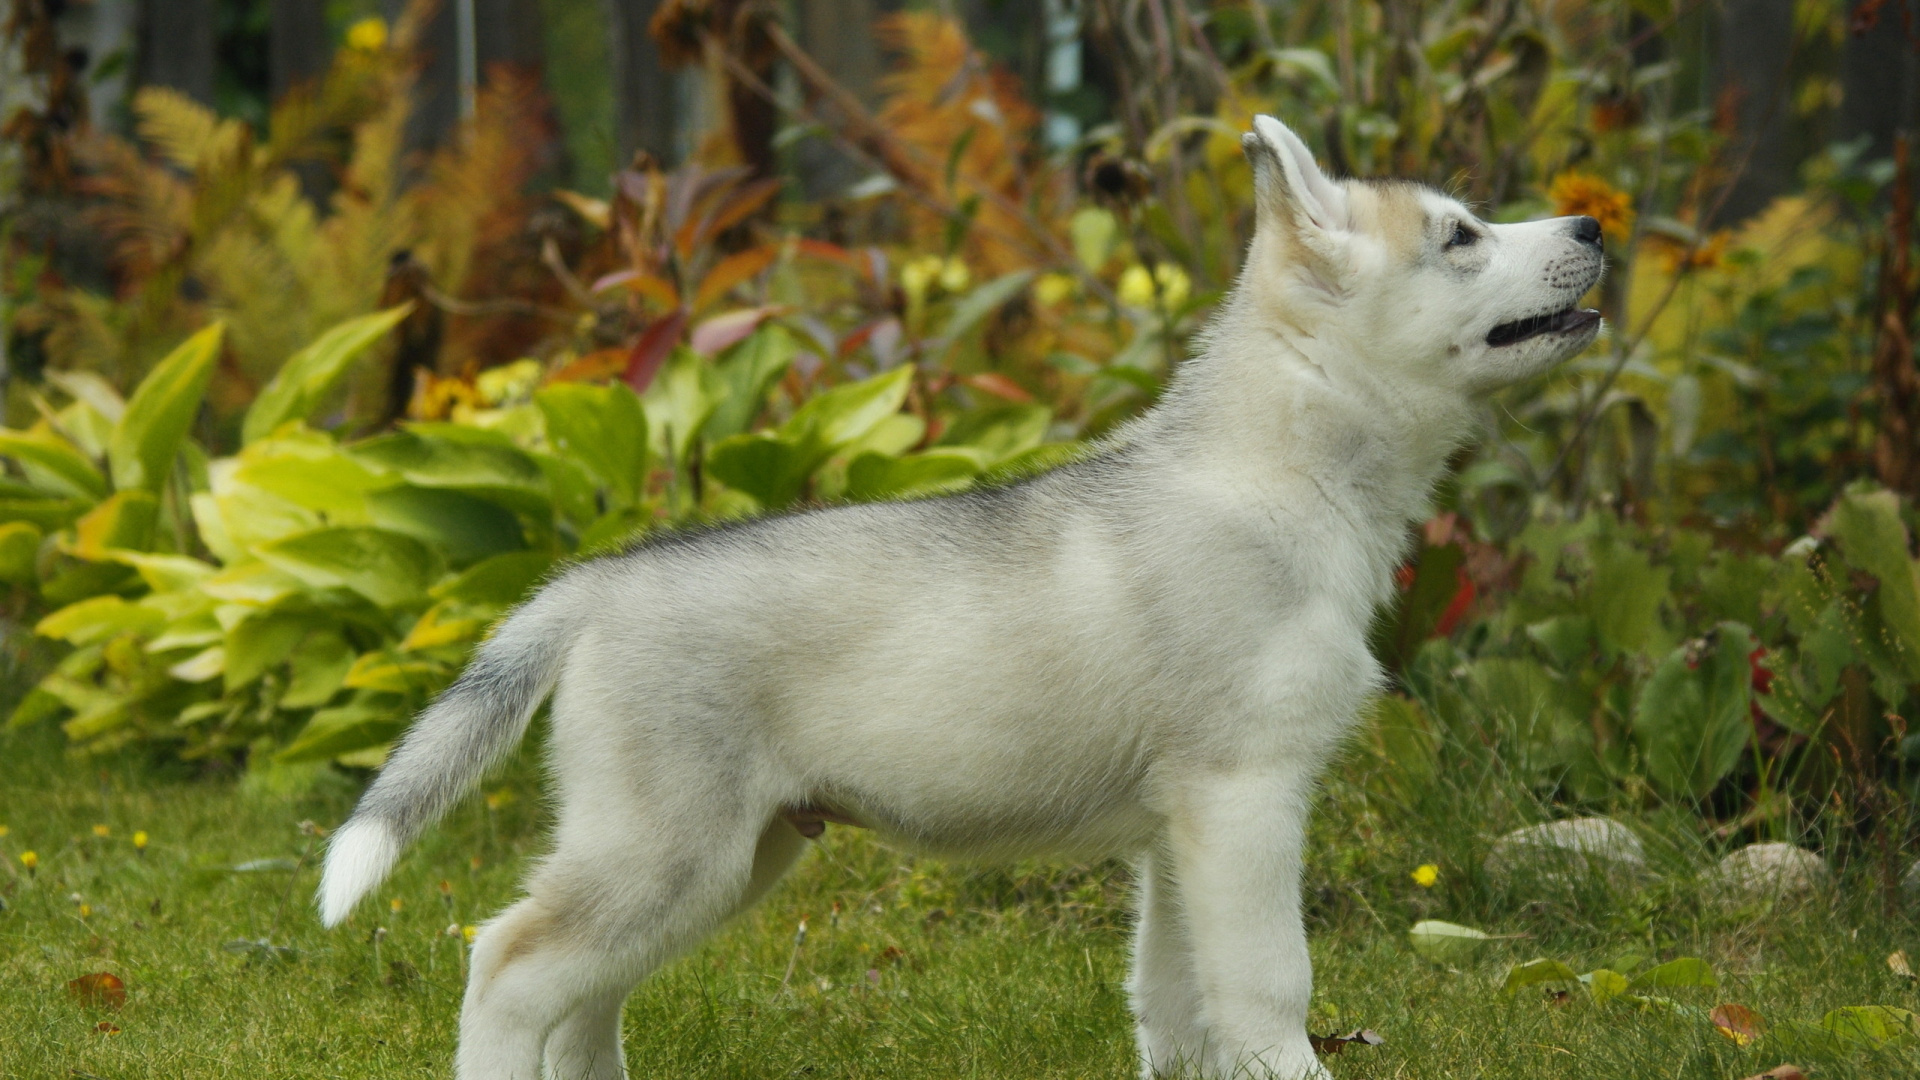 White Siberian Husky Puppy on Green Grass Field During Daytime. Wallpaper in 1920x1080 Resolution